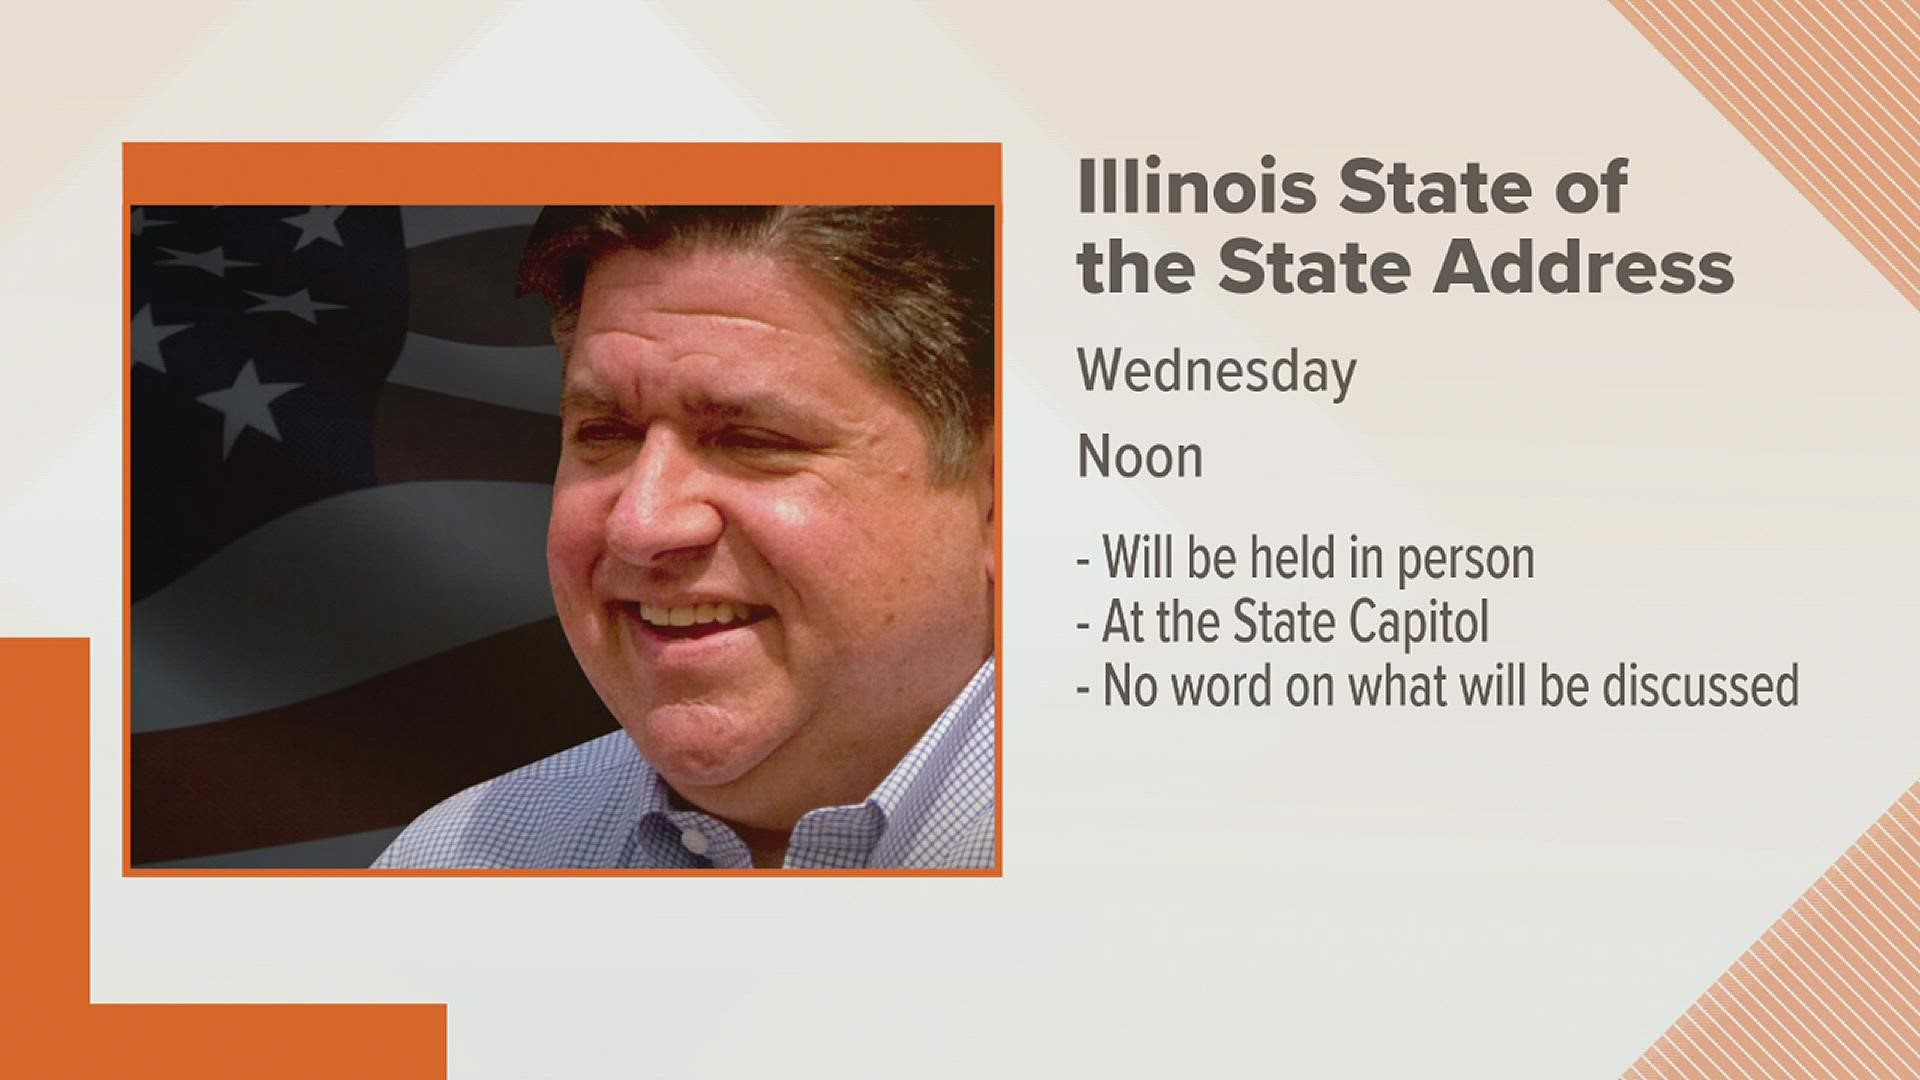 Here's what we know ahead of Governor Pritzker's State of the State Address